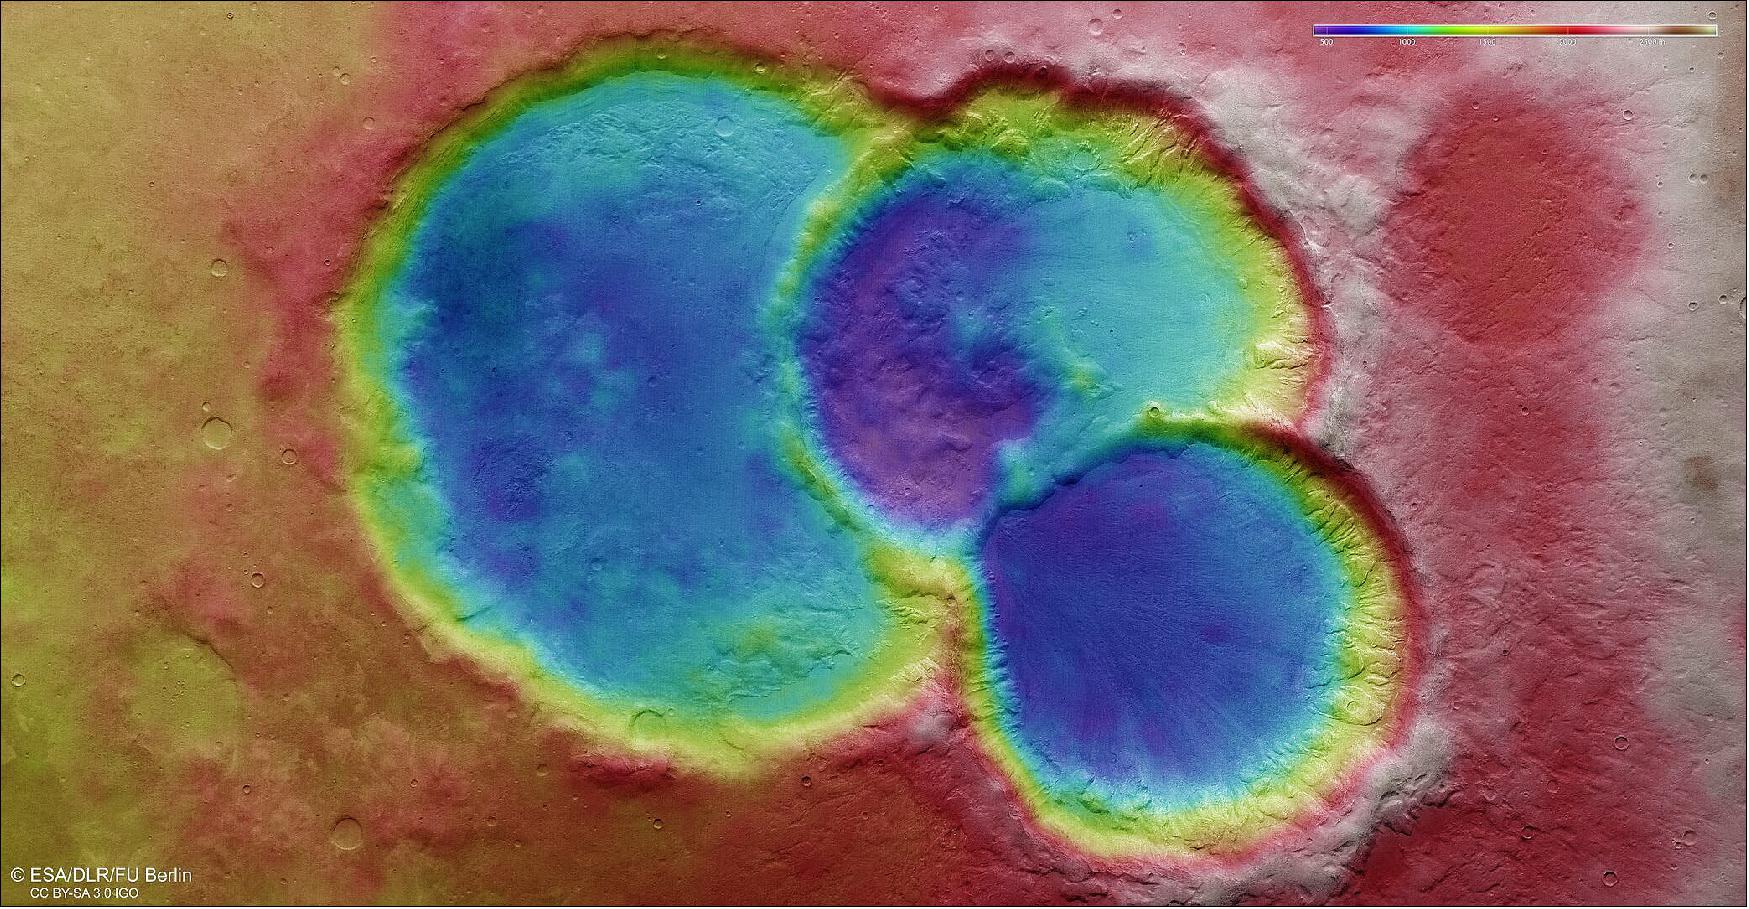 Figure 72: Topographic view of triple crater on Mars. This color-coded topographic image shows a triple crater in the ancient martian highlands, based on data gathered by the Mars Express High Resolution Stereo Camera (HRSC) during orbit 20982 (6 August 2020). This view is based on a digital terrain model (DTM) of the region, from which the topography of the landscape can be derived; lower parts of the surface are shown in blues and purples, while higher altitude regions show up in whites, yellows and reds, as indicated on the scale to the top right. North is to the right (image credit: ESA/DLR/FU Berlin, CC BY-SA 3.0 IGO)